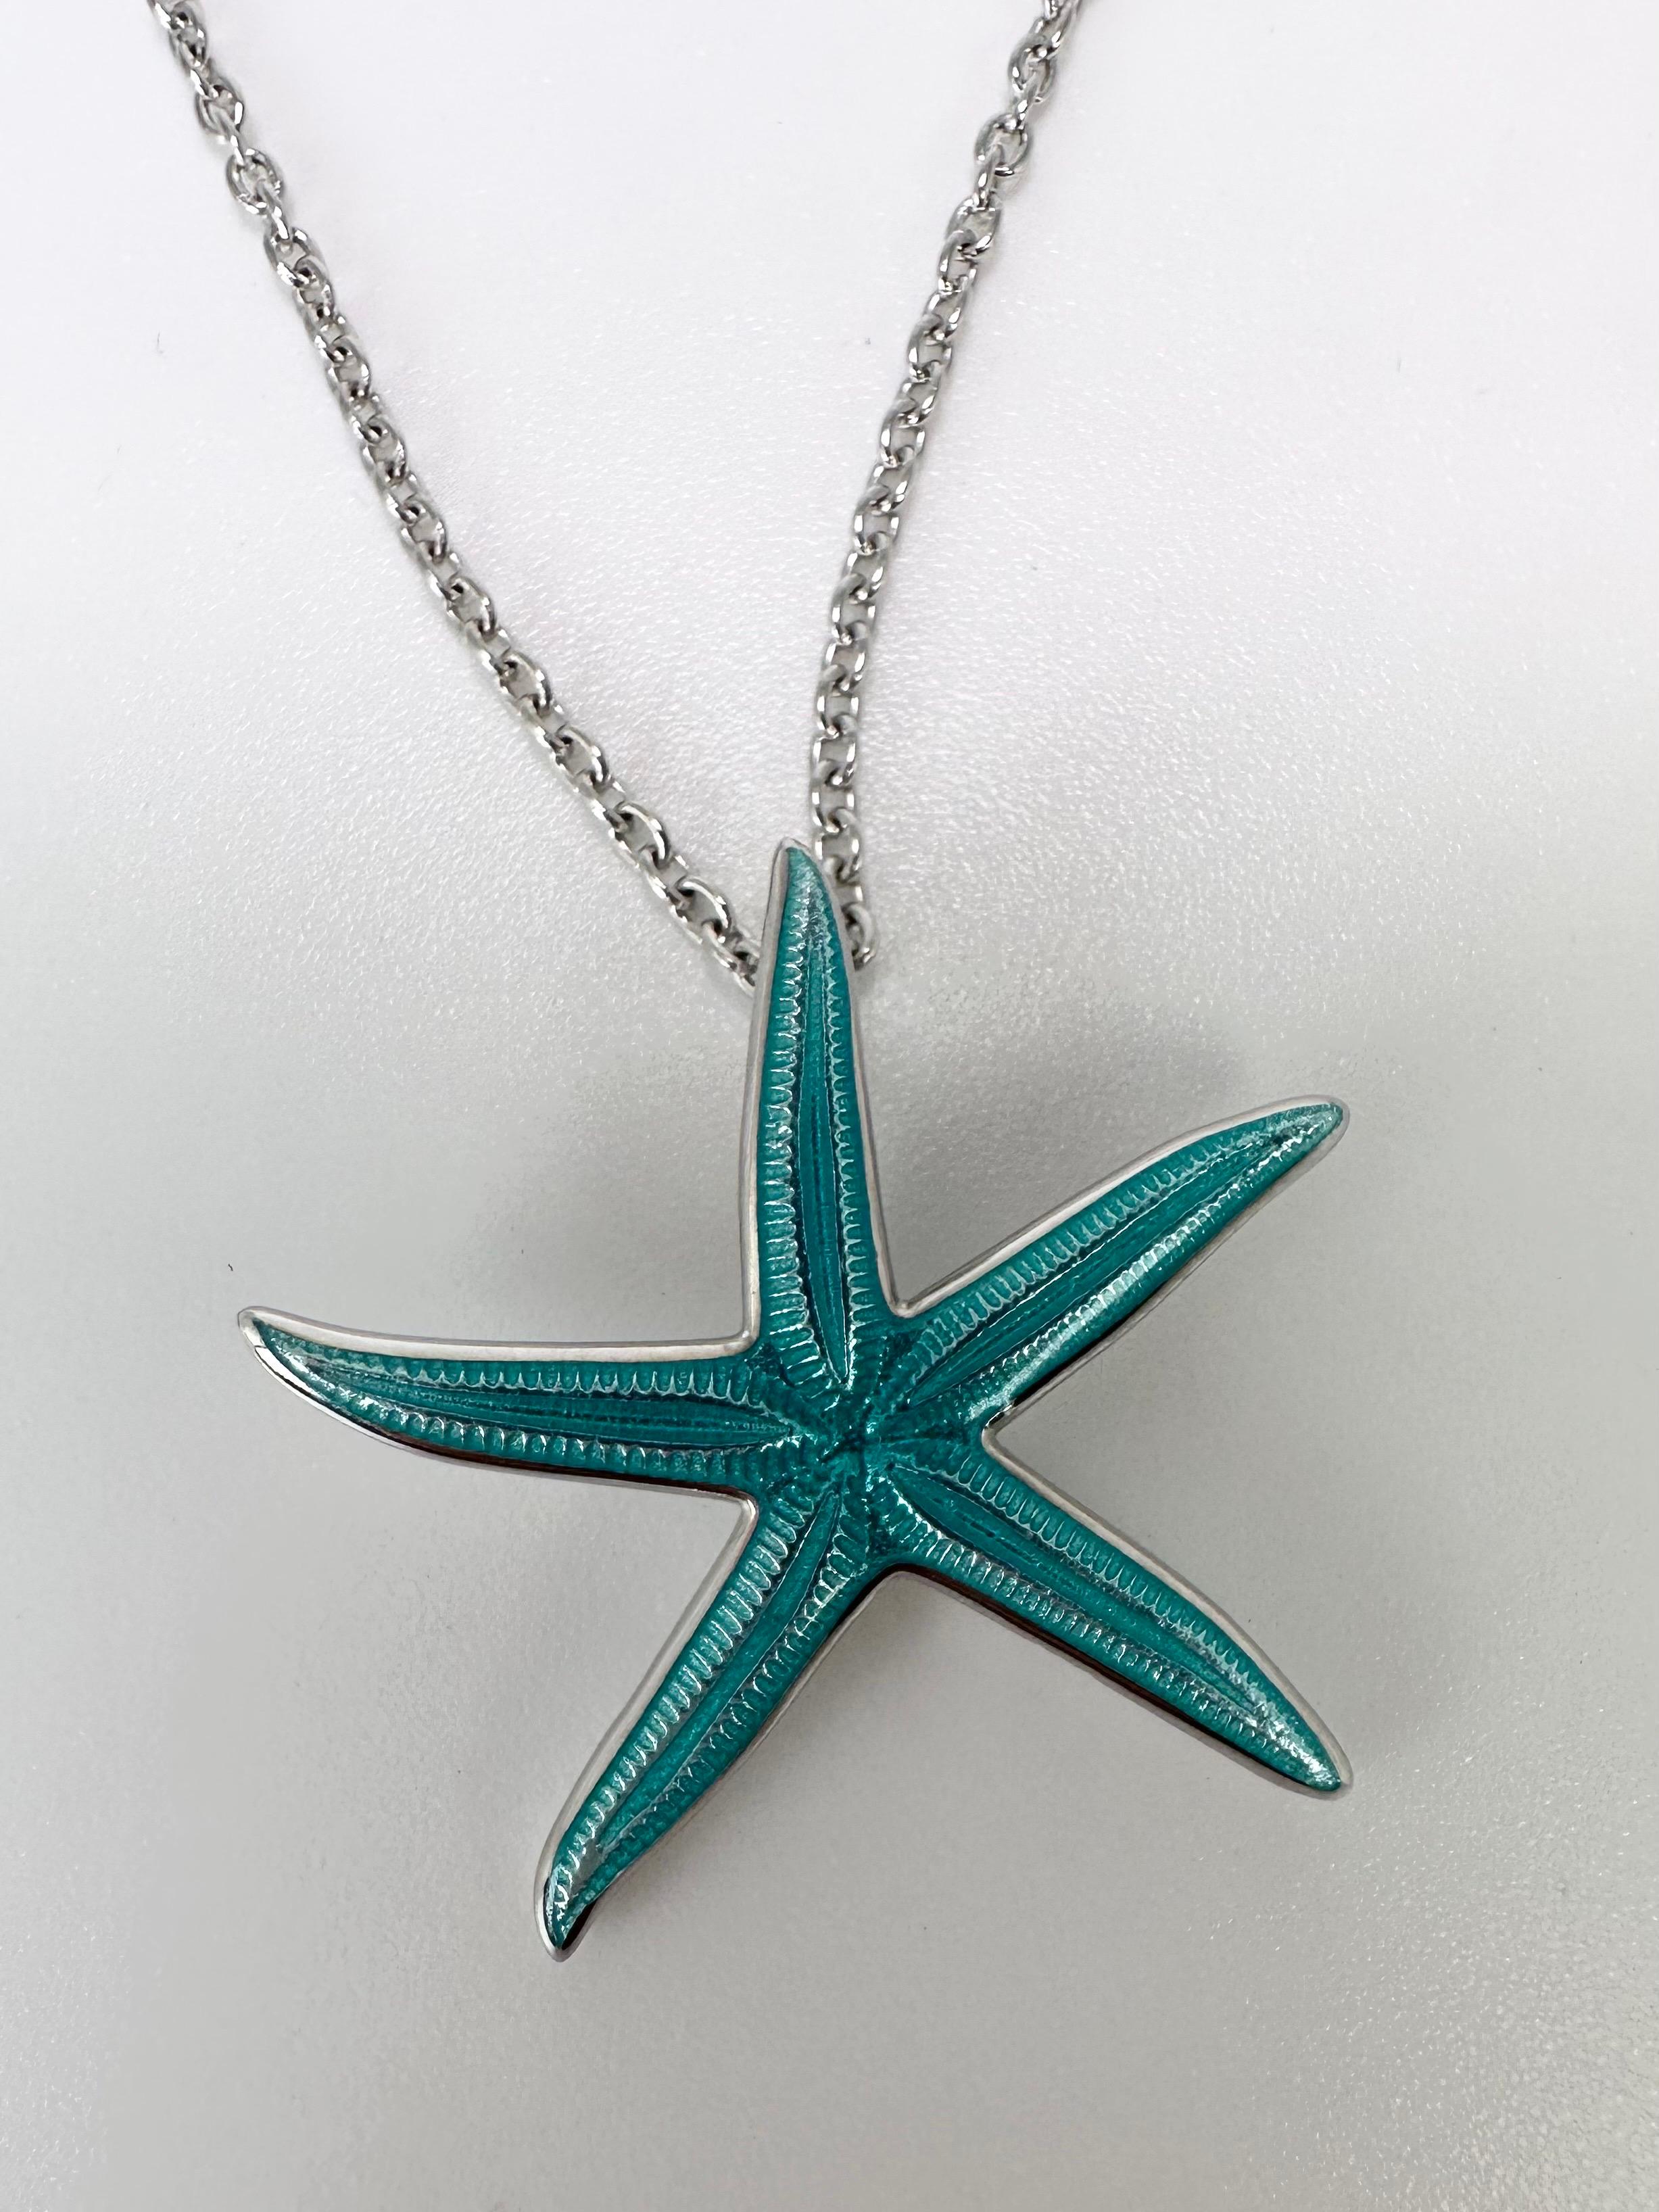 Starfish with bluish green enamel well crafted in sterling SILVER 925.
METAL: silver 925
Grams:5.80
Item: 64000015oe

WHAT YOU GET AT STAMPAR JEWELERS:
Stampar Jewelers, located in the heart of Jupiter, Florida, is a custom jewelry store and studio